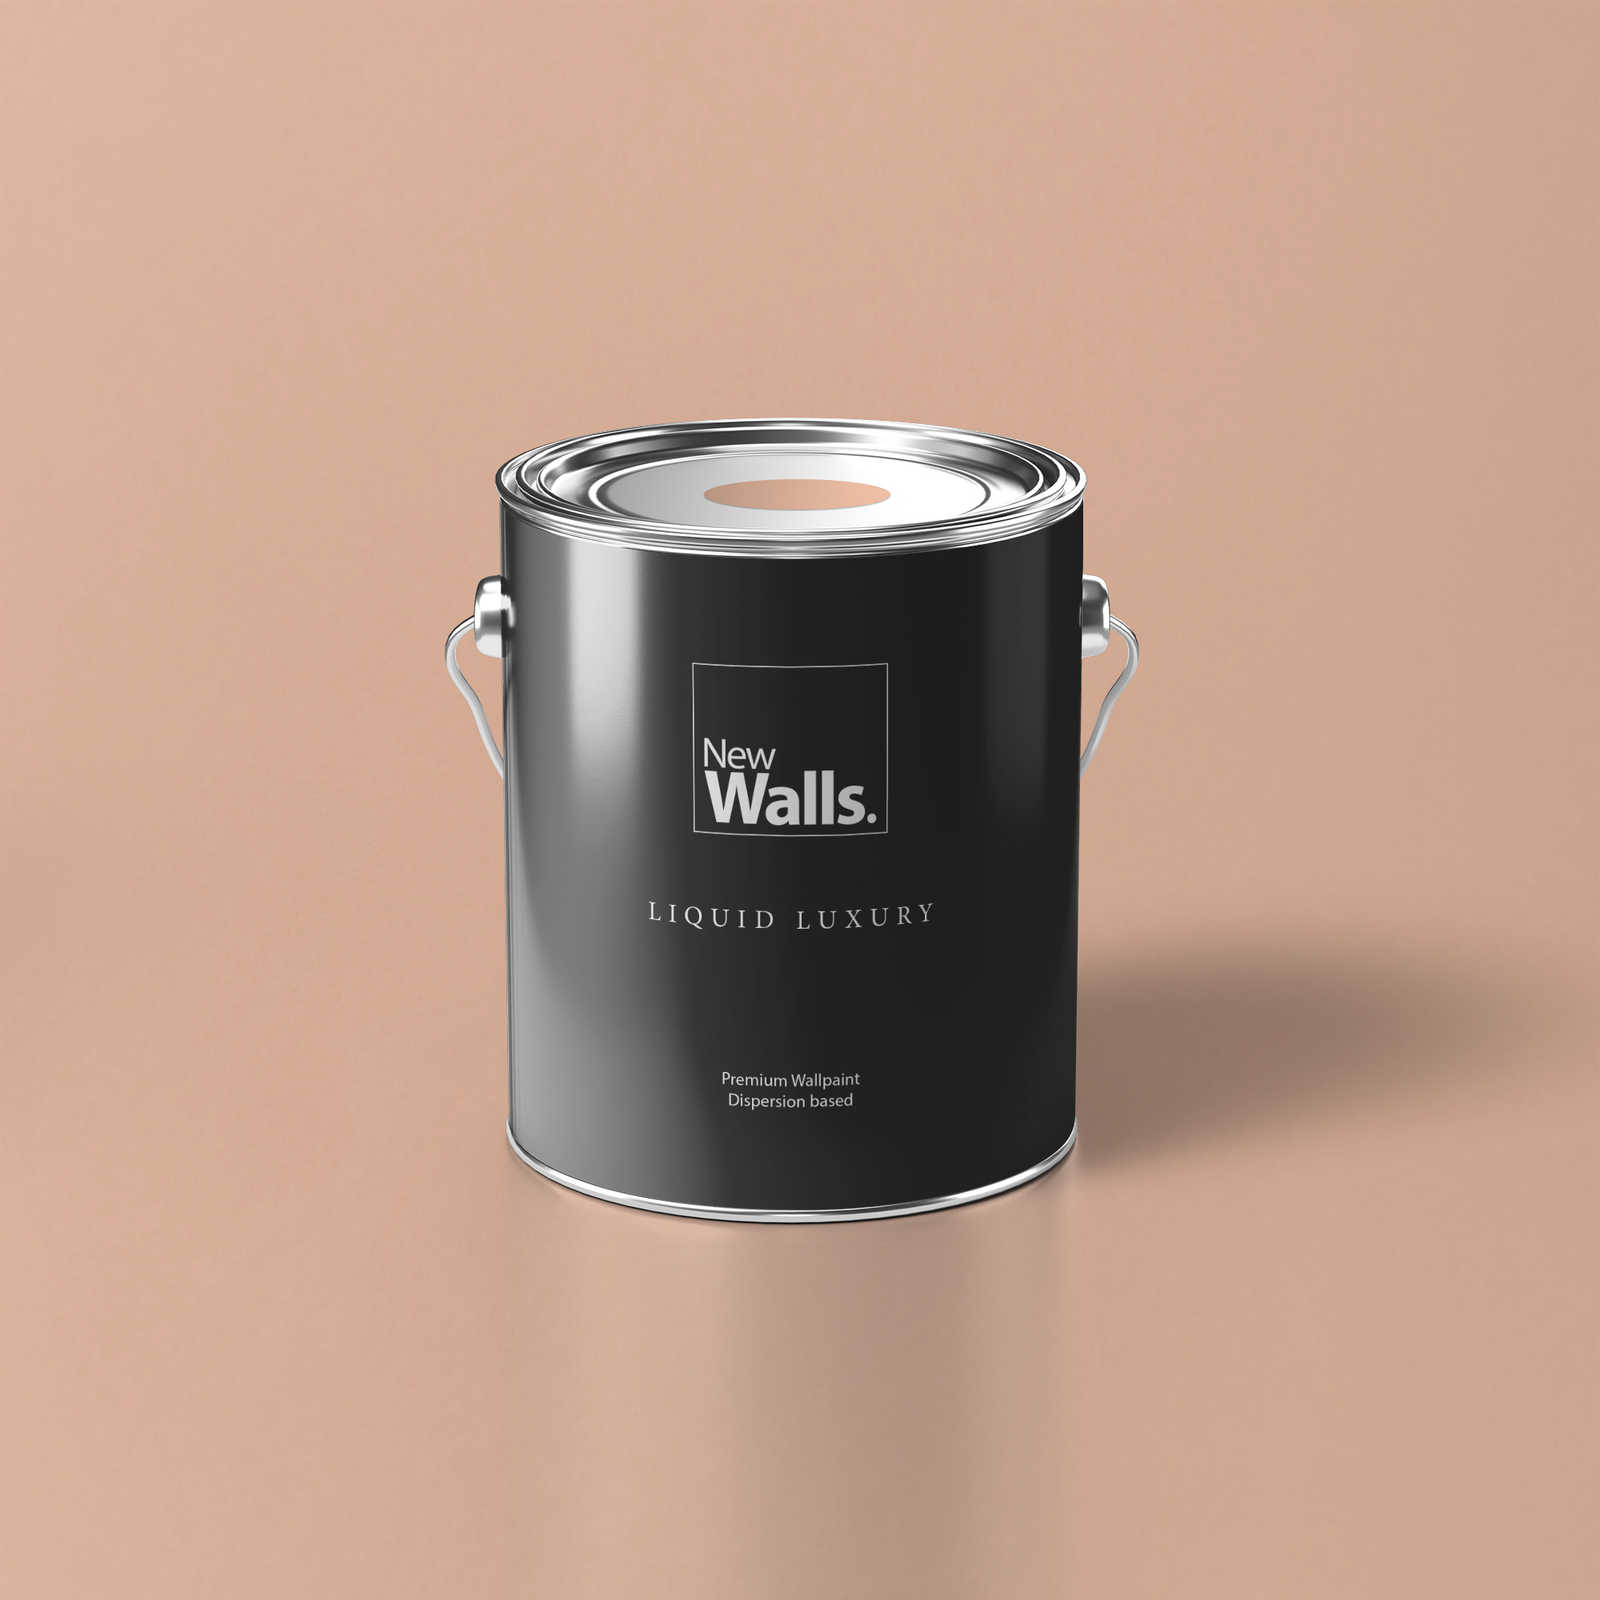 Premium Wall Paint serene salmon »Active Apricot« NW912 – 5 litre
